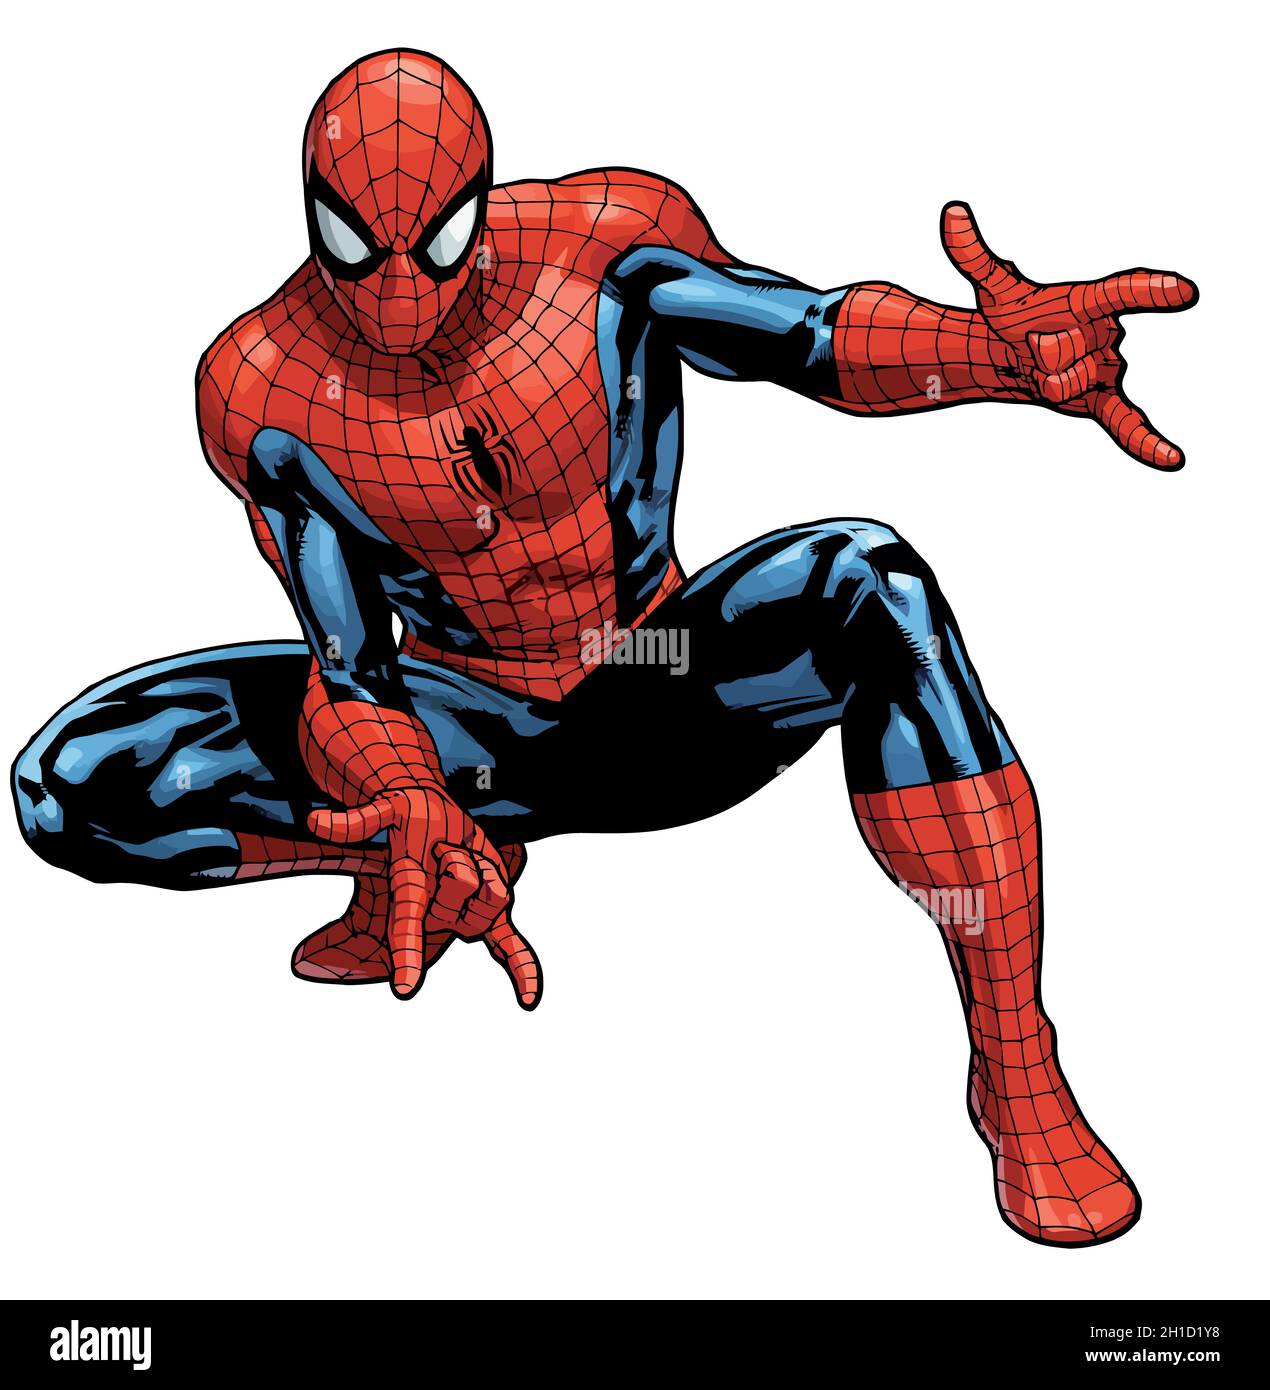 Powers Defined: Spider-Man